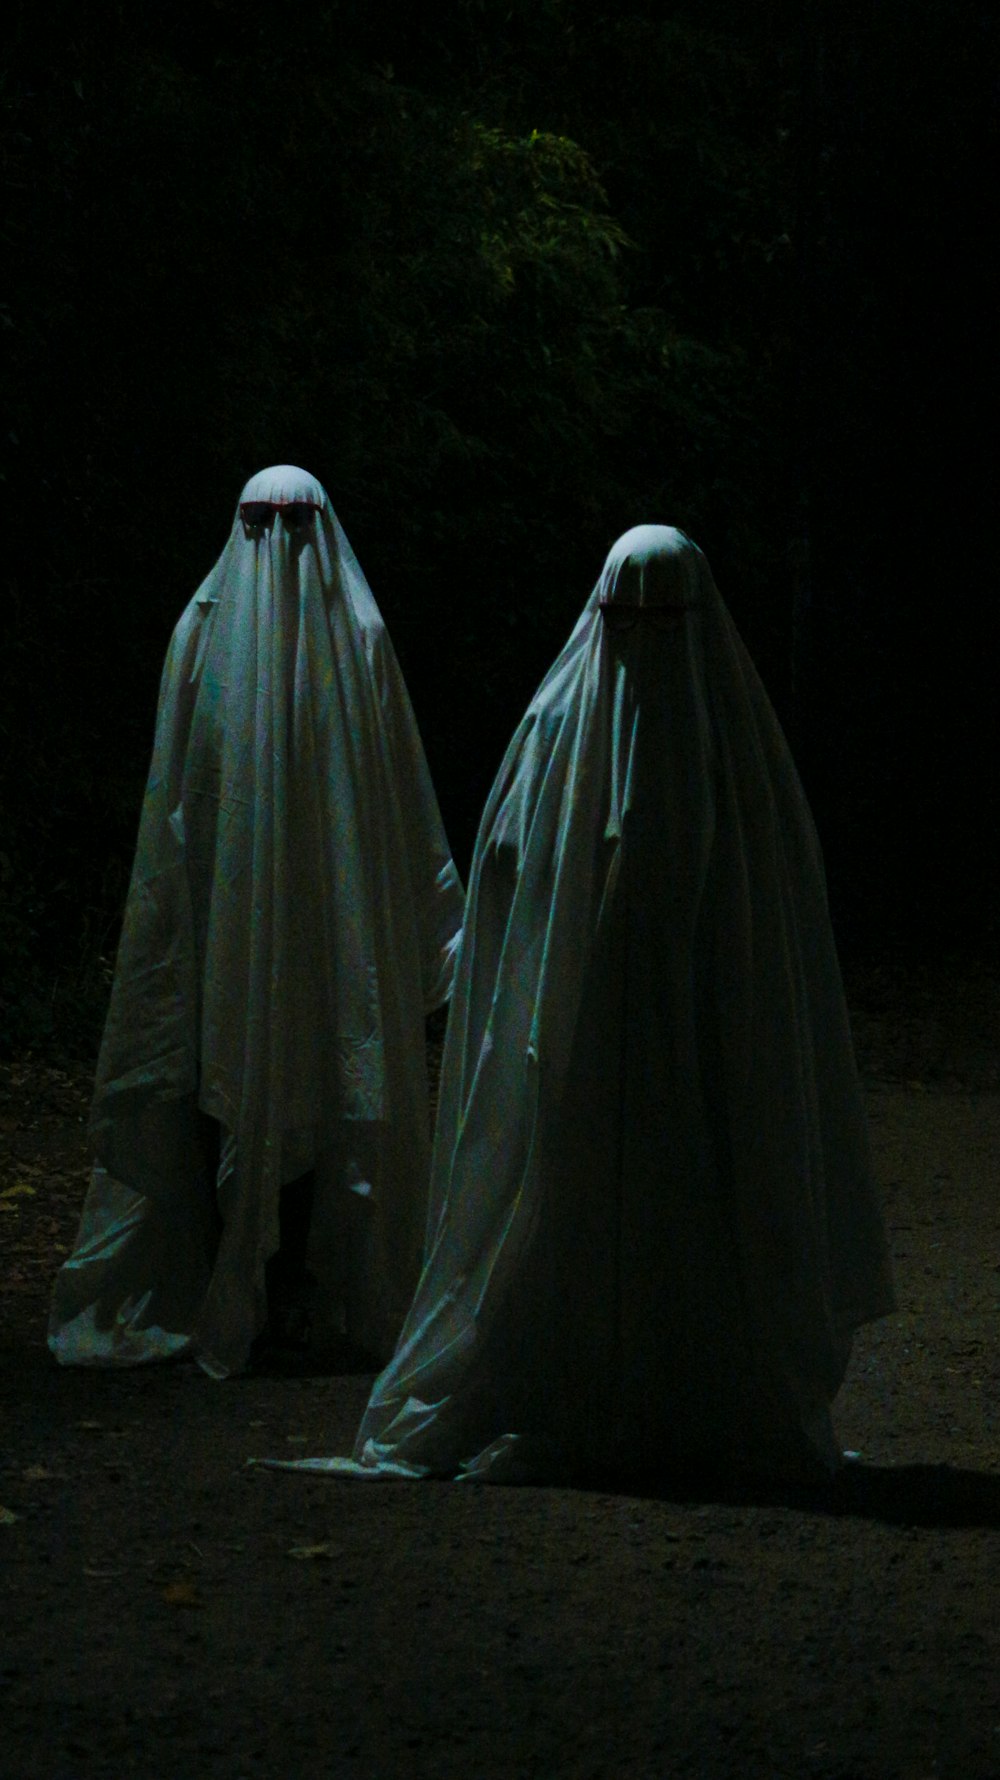 two ghostly people in white cloths walking in the dark